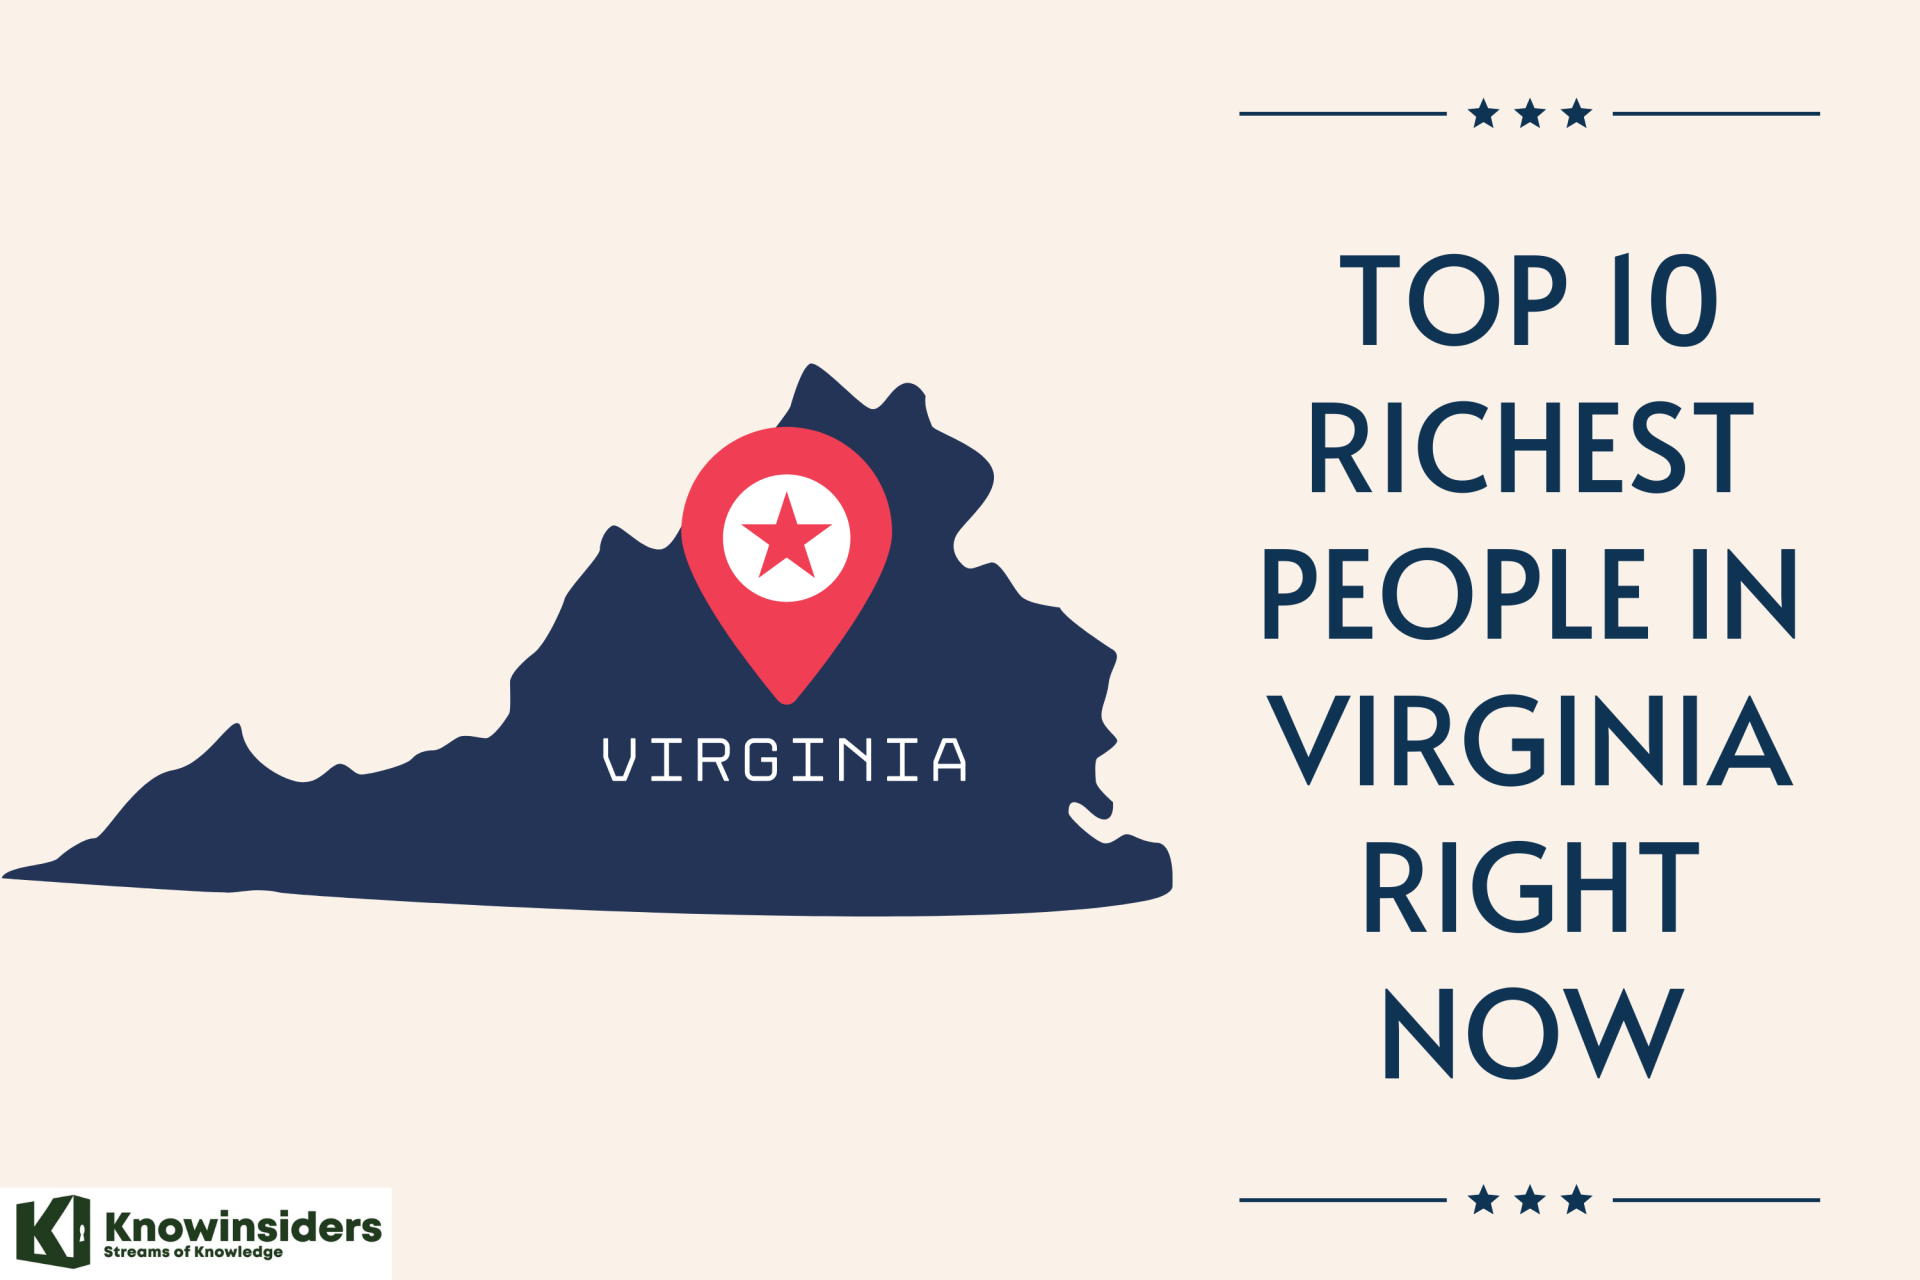 Top 10 Richest People in Virginia & How They Got their Wealth